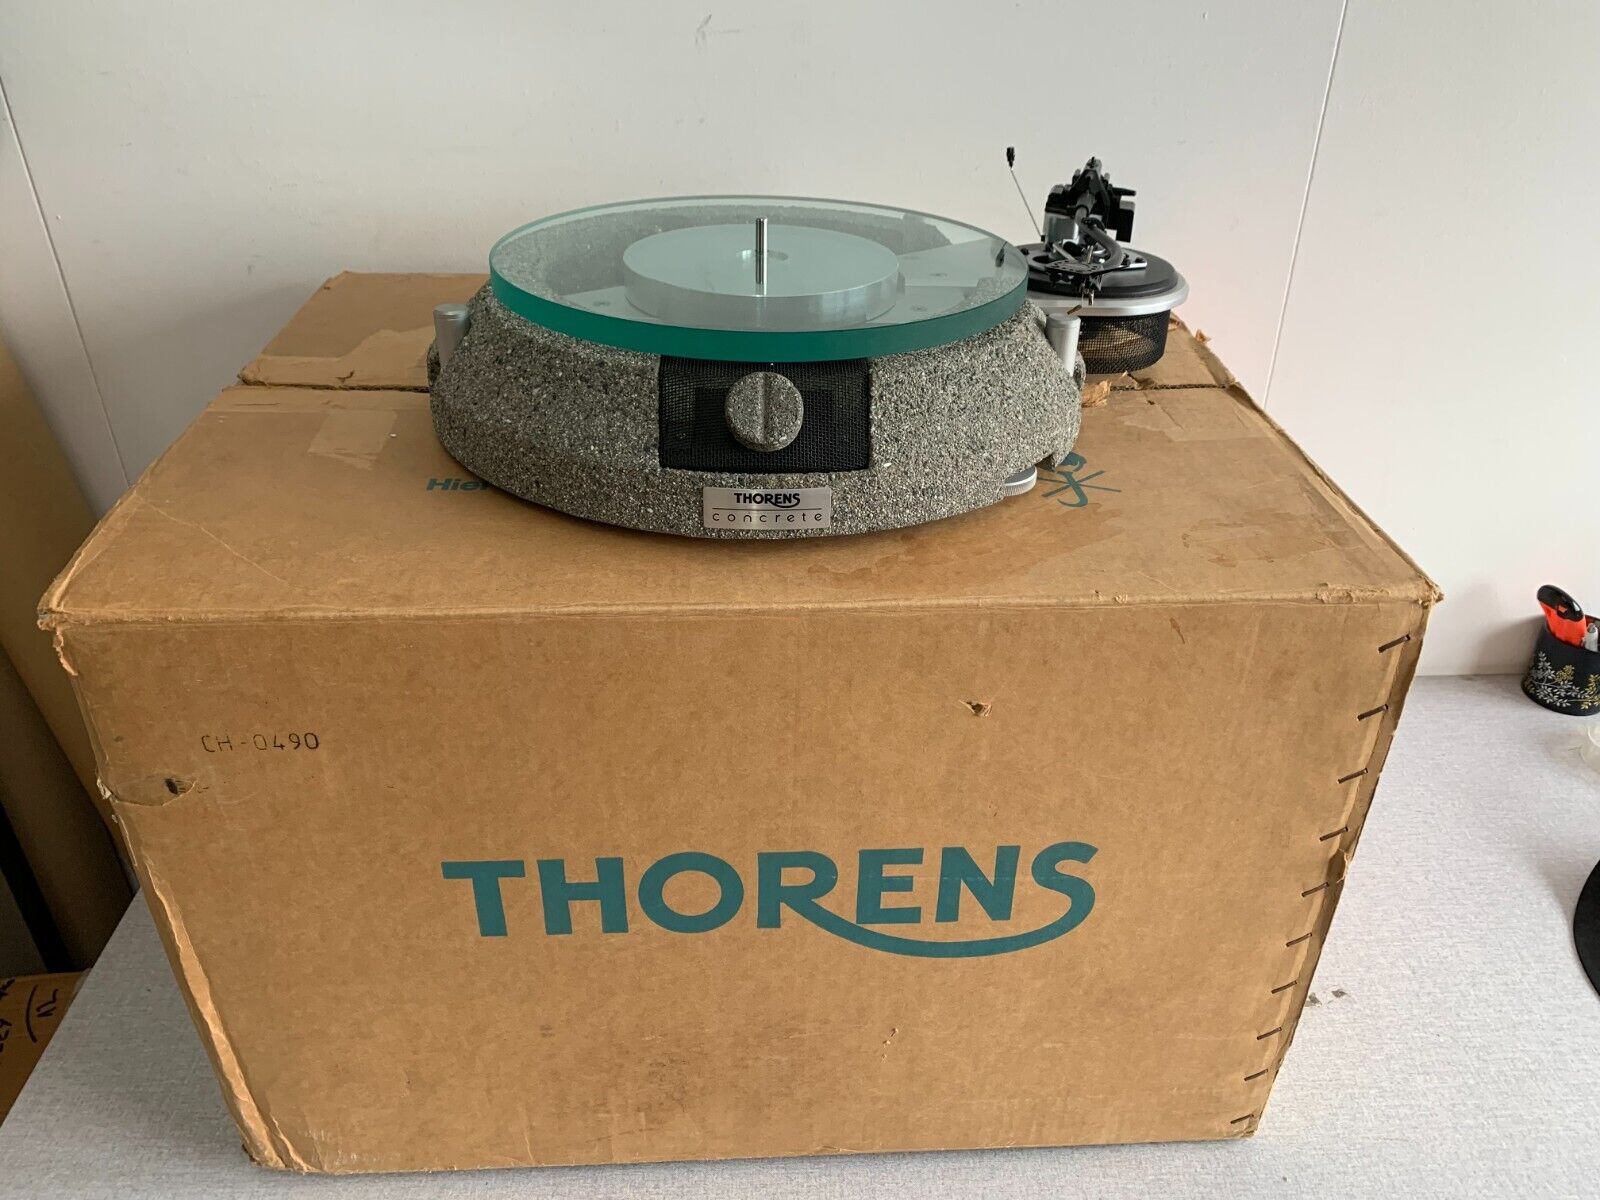 VERY RARE THORENS CONCRETE HIGH END TURNTABLE USED